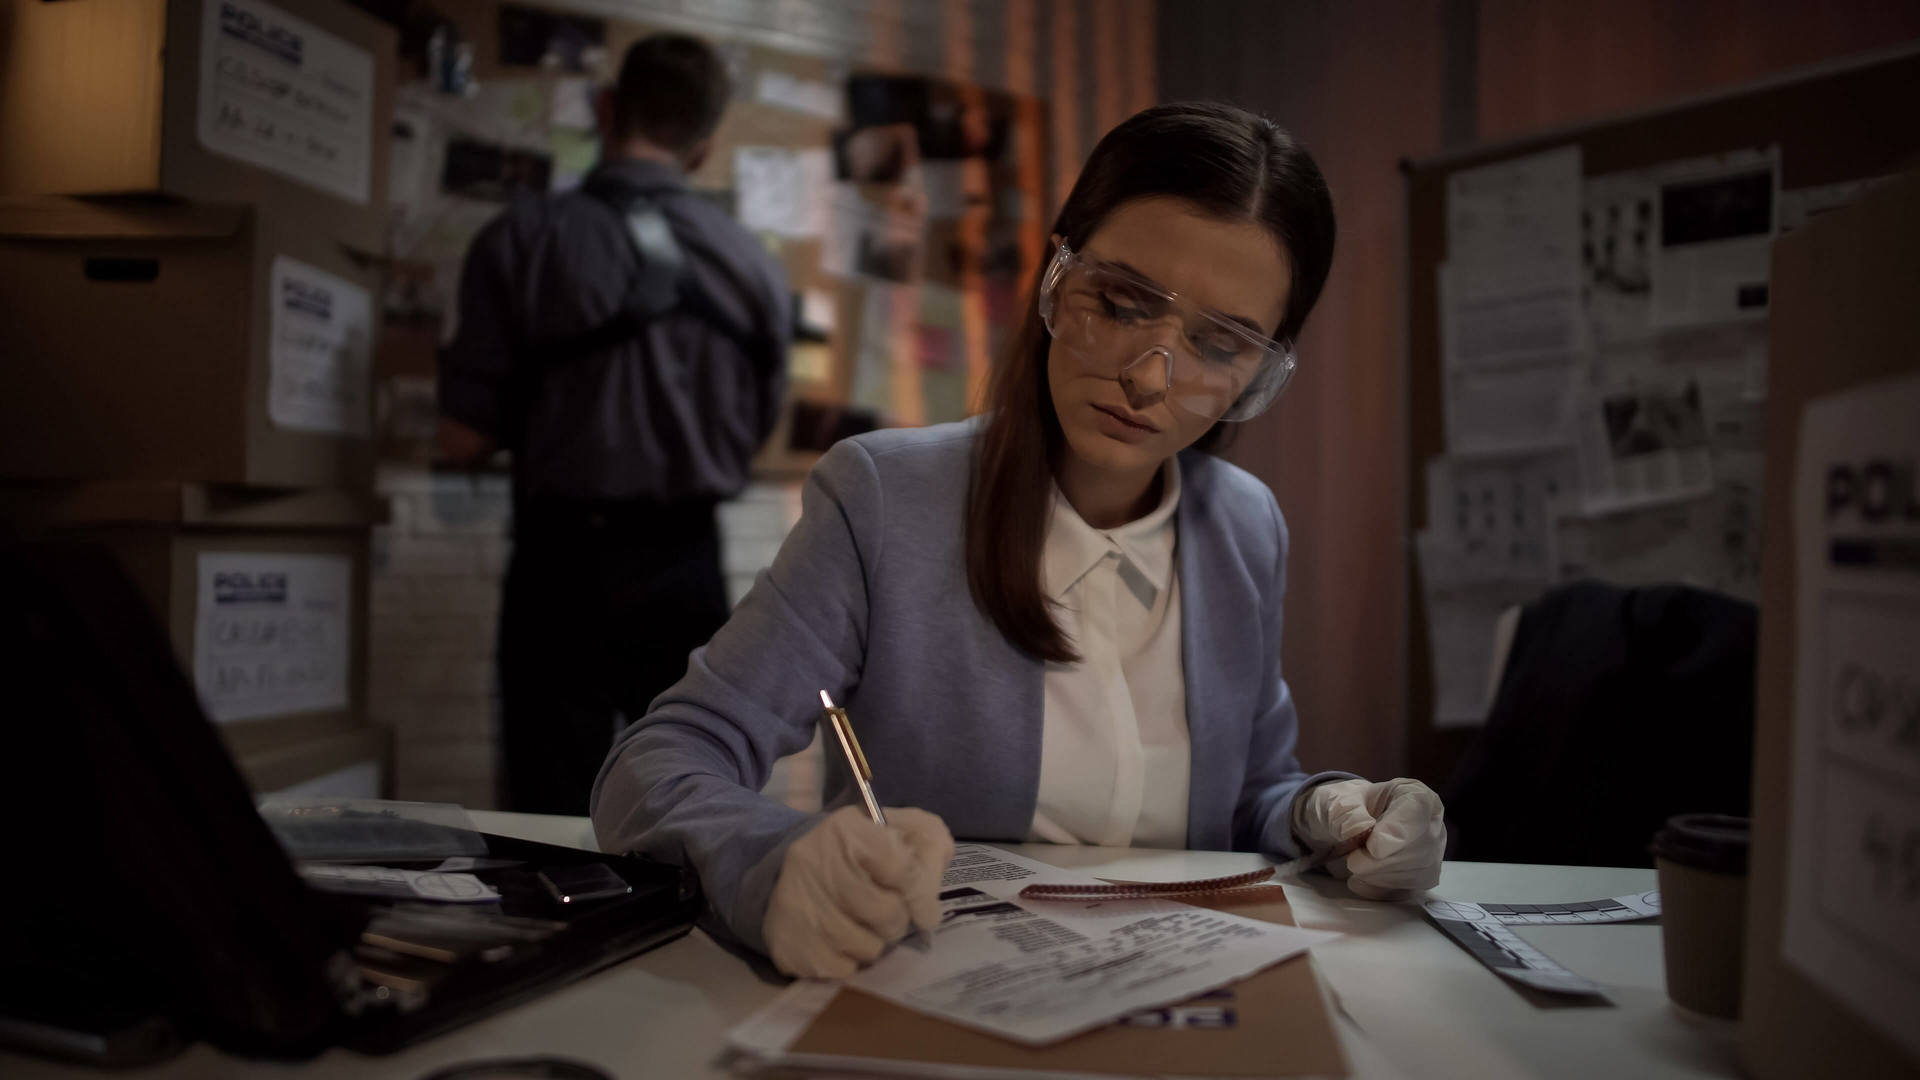 A female investigator in protective glasses sat at a table writing a report with a male in the background looking at evidence boxes